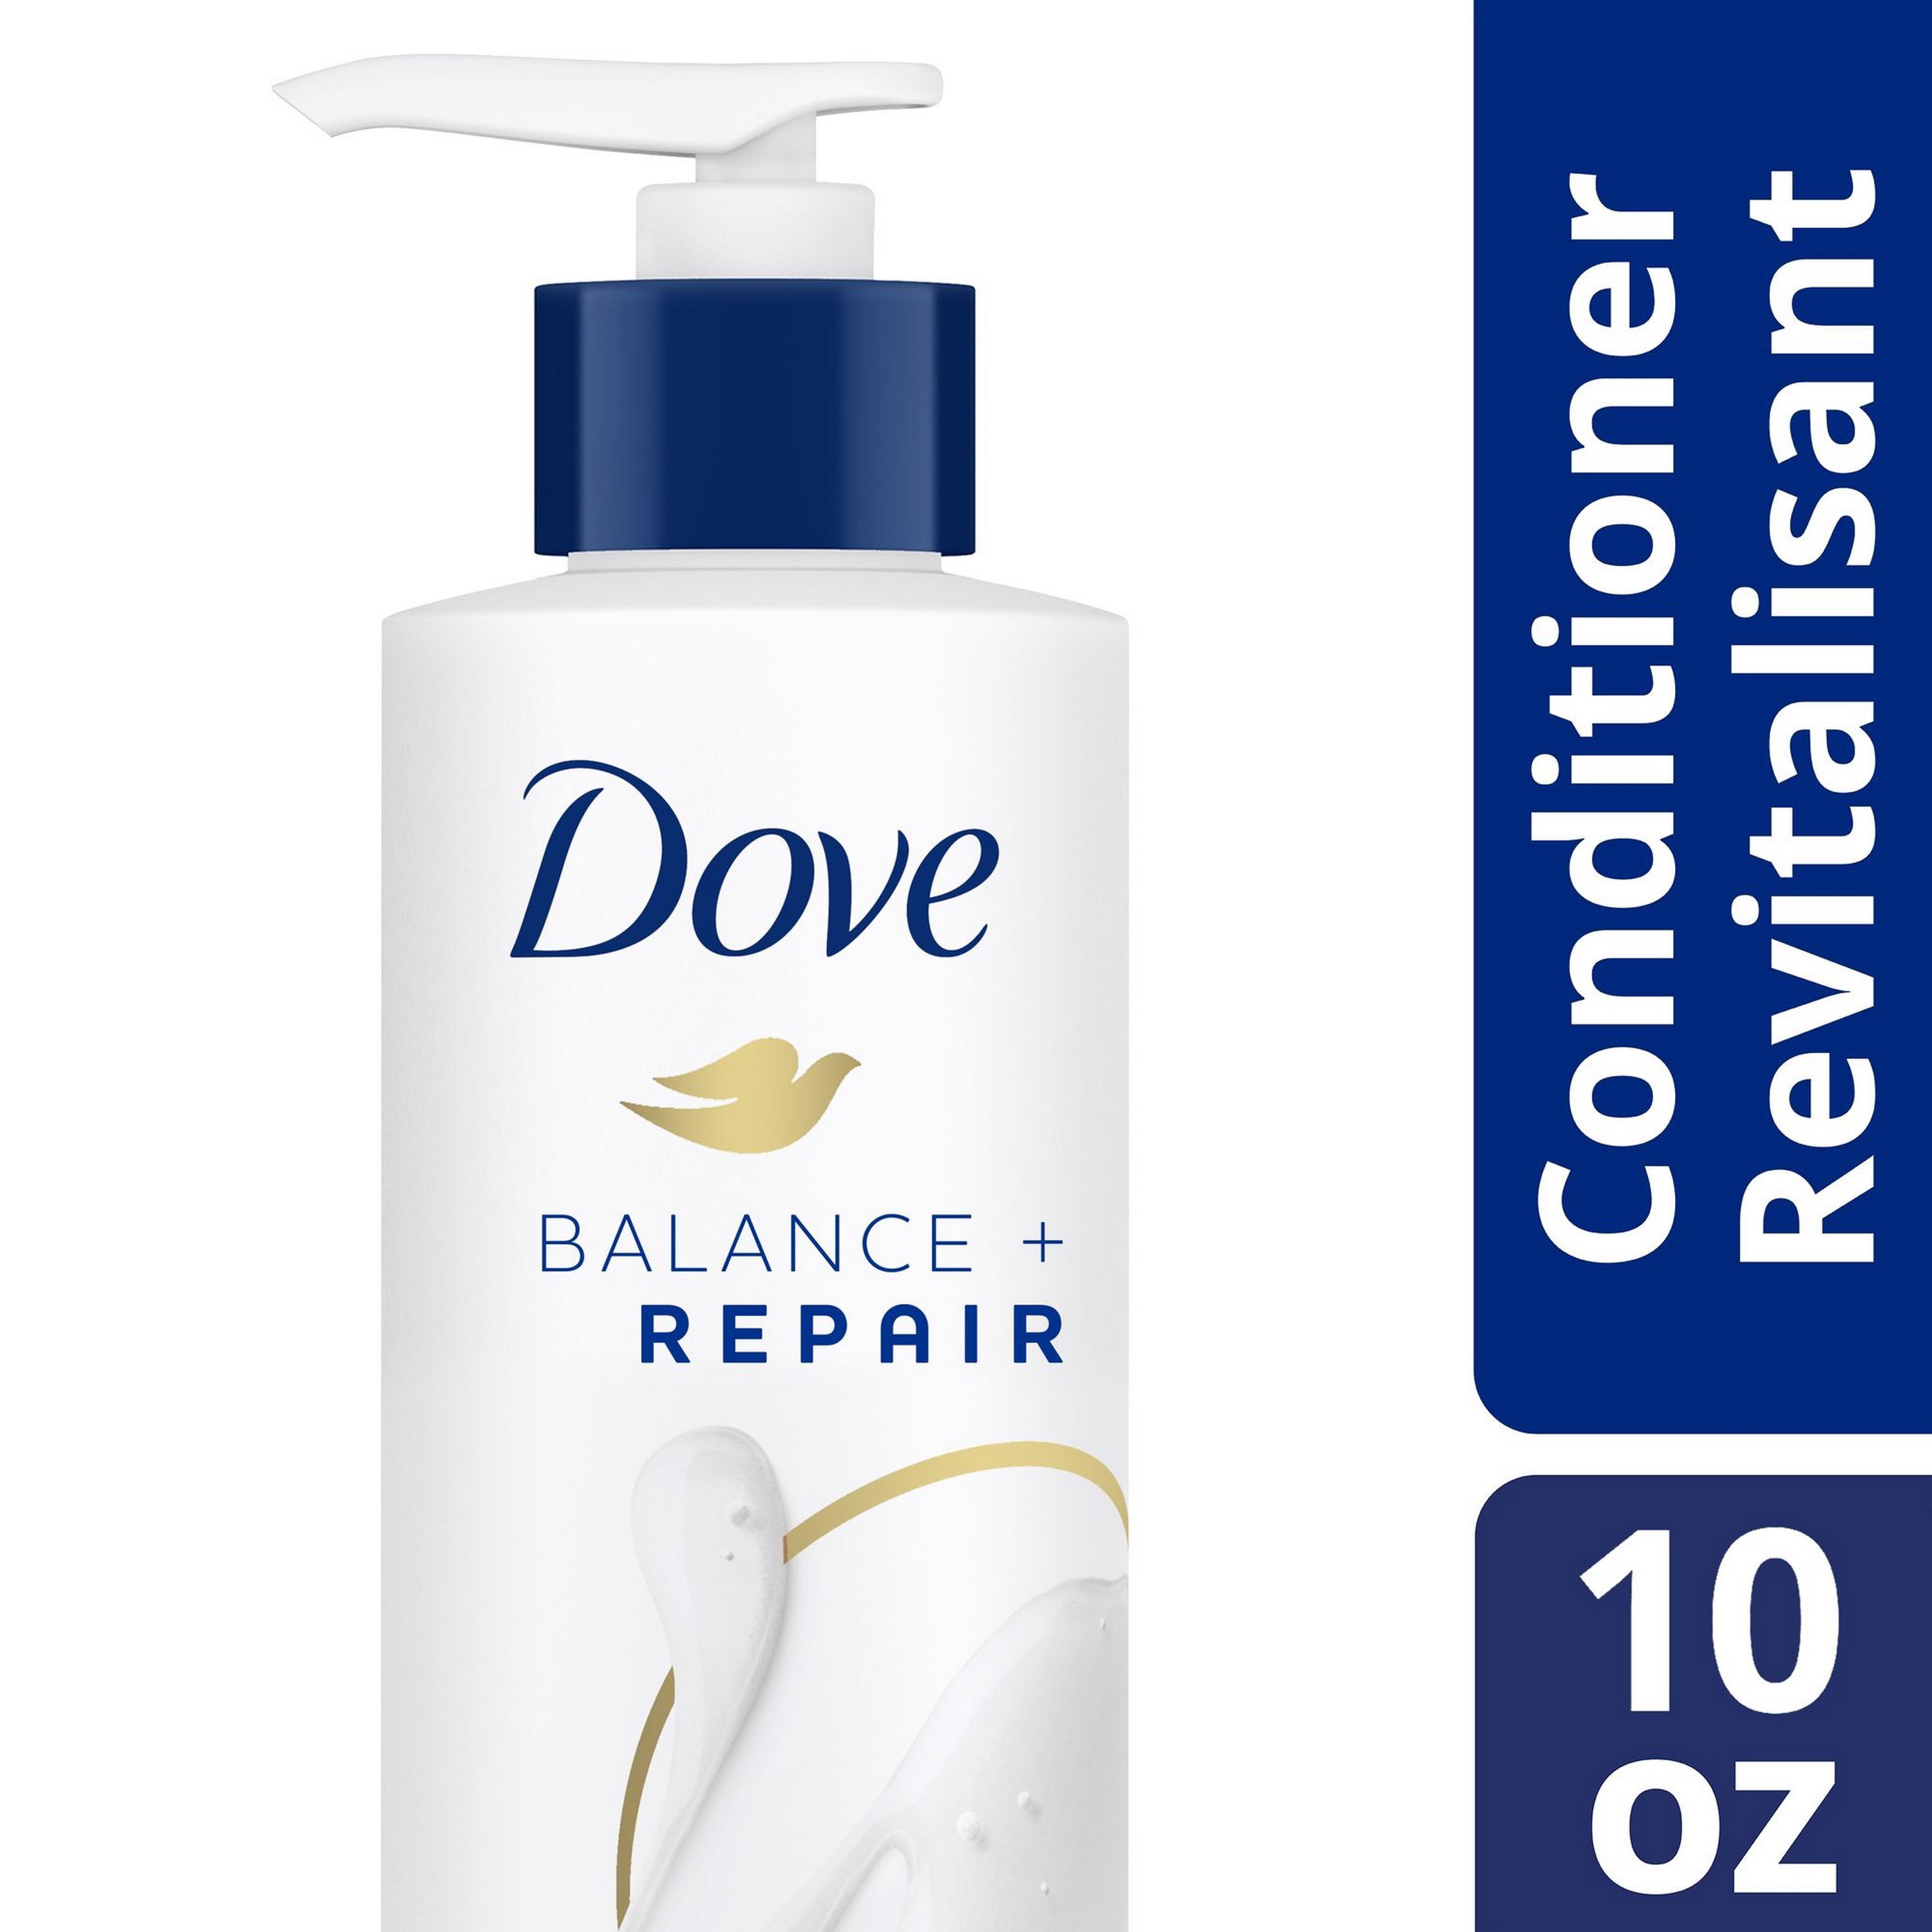 Dove UltraCare Conditioners Milk-Gel For Fine, Dry, Damaged Hair Balanced  Moisture 10 oz